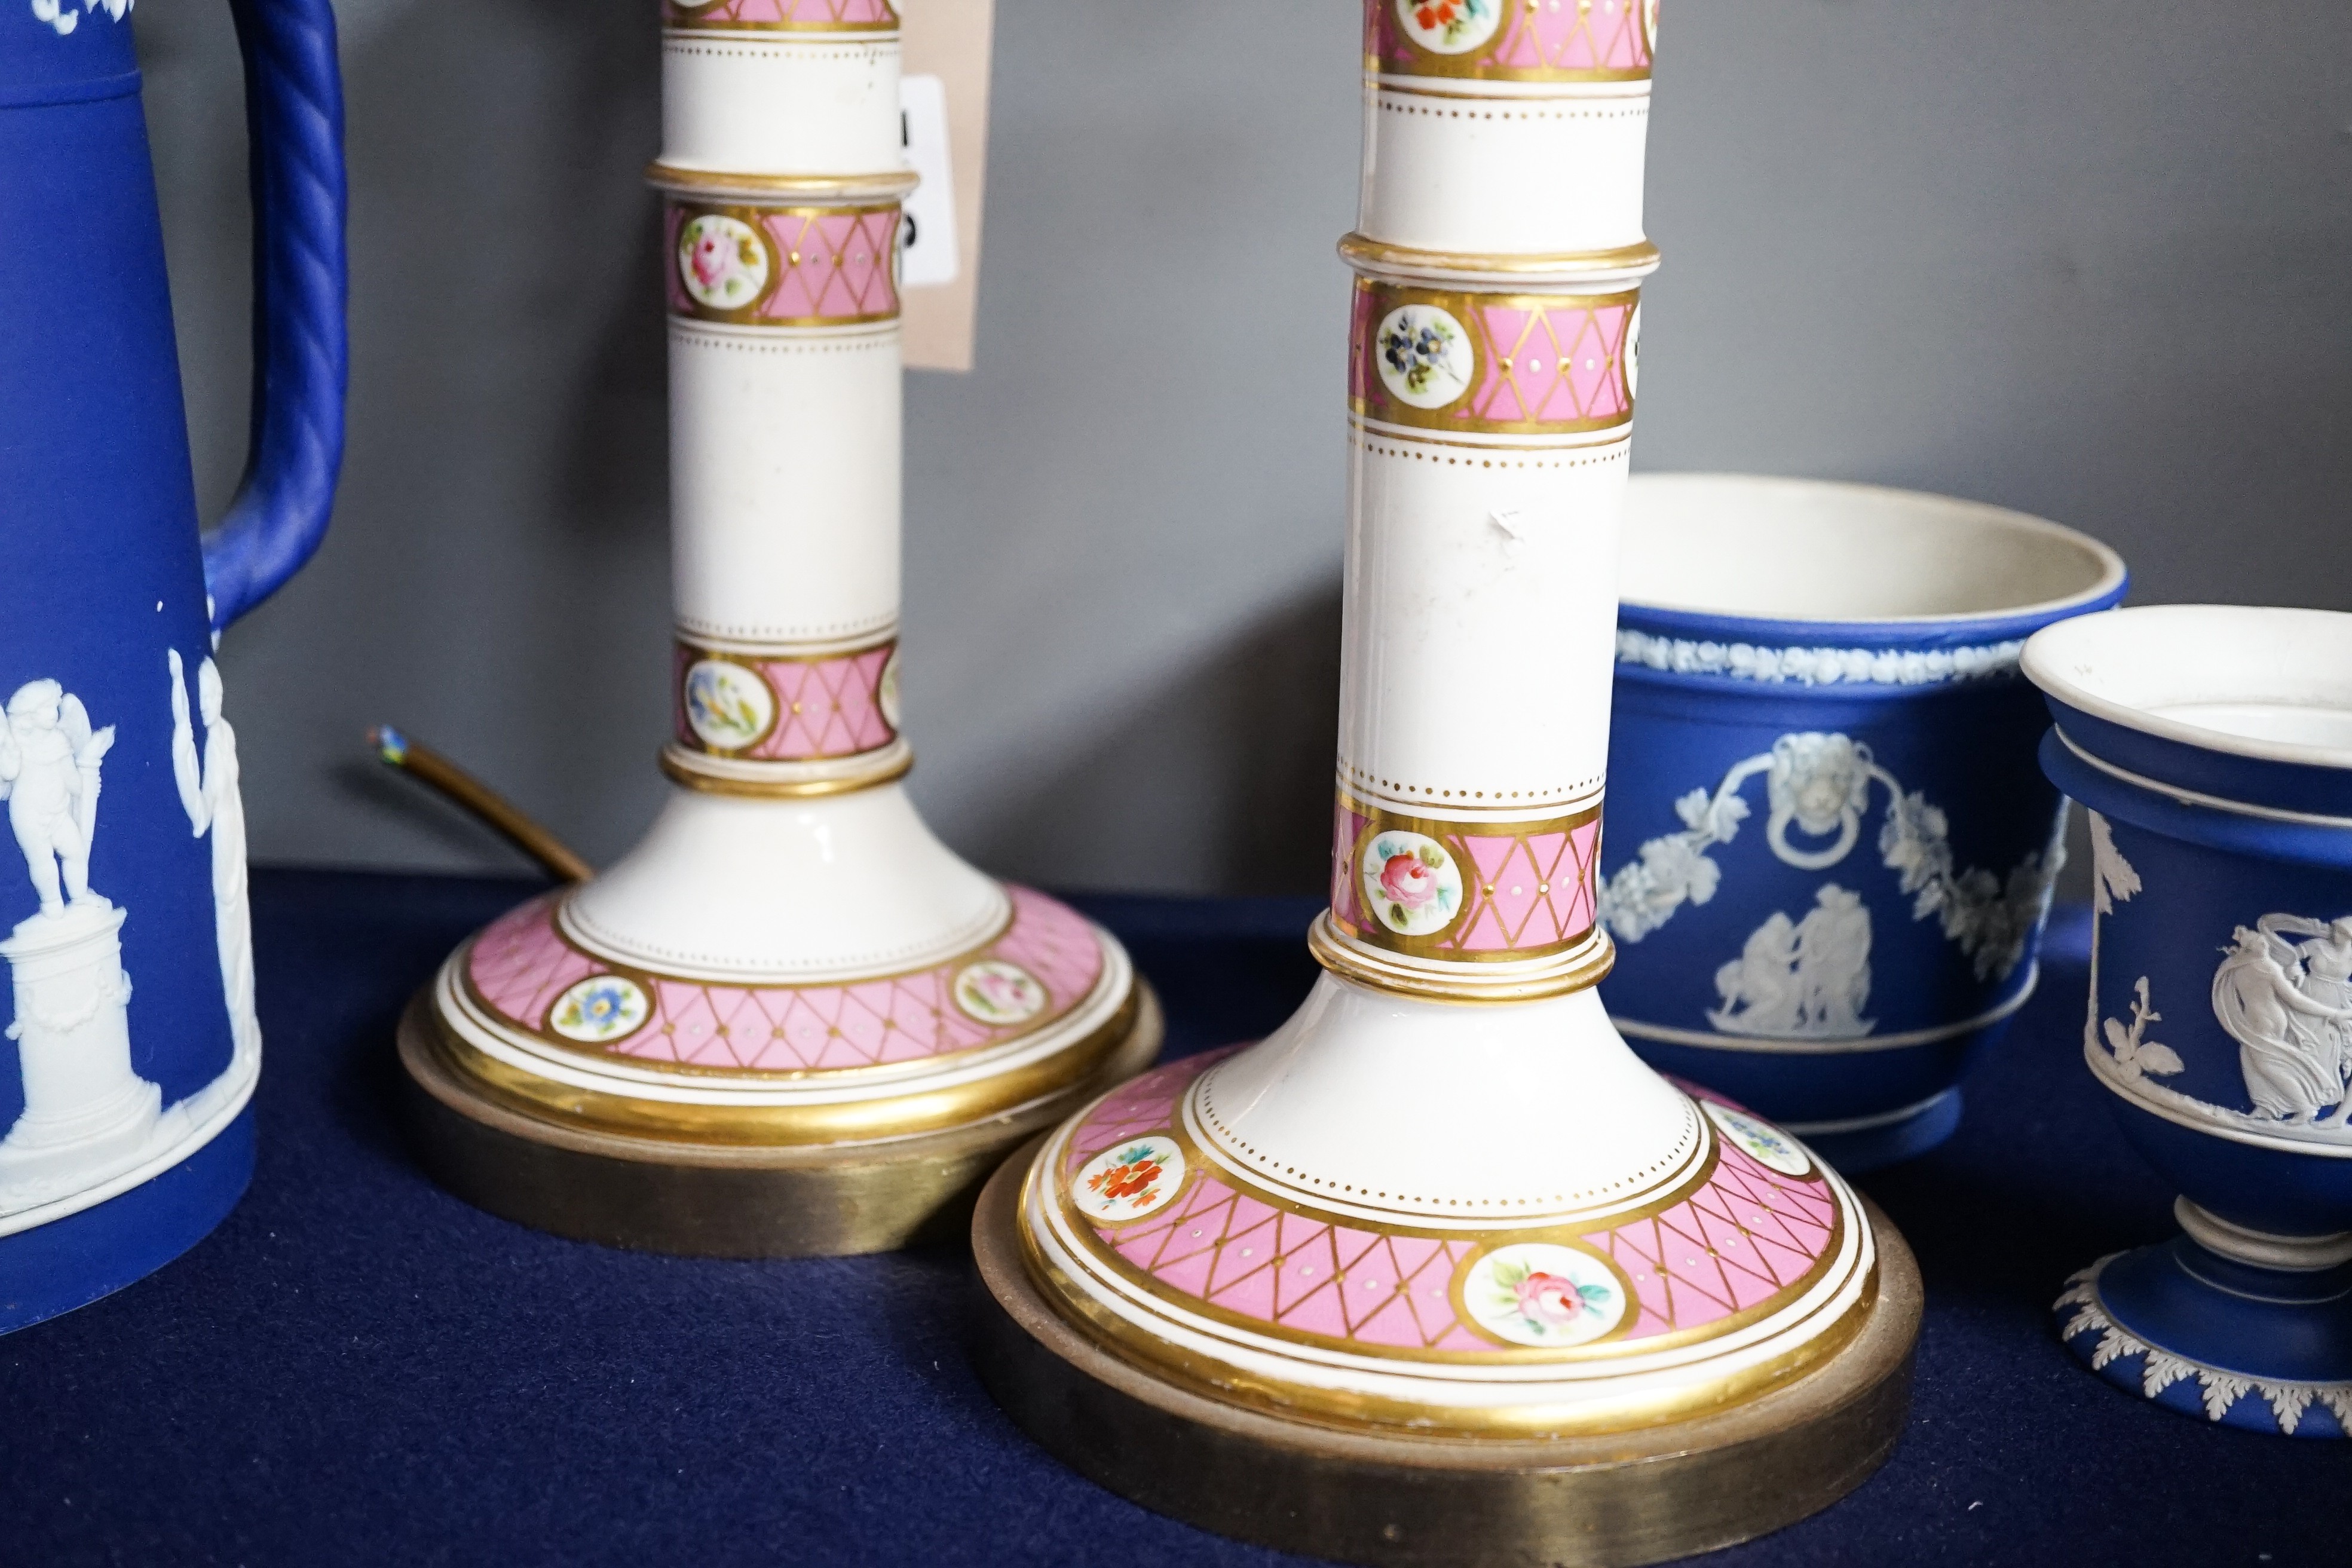 Three mid to late 19th century pieces of Wedgwood Jasperware, including a coffee pot and a small cashe-pot, a pair of 19th century porcelain candlesticks converted into lamps